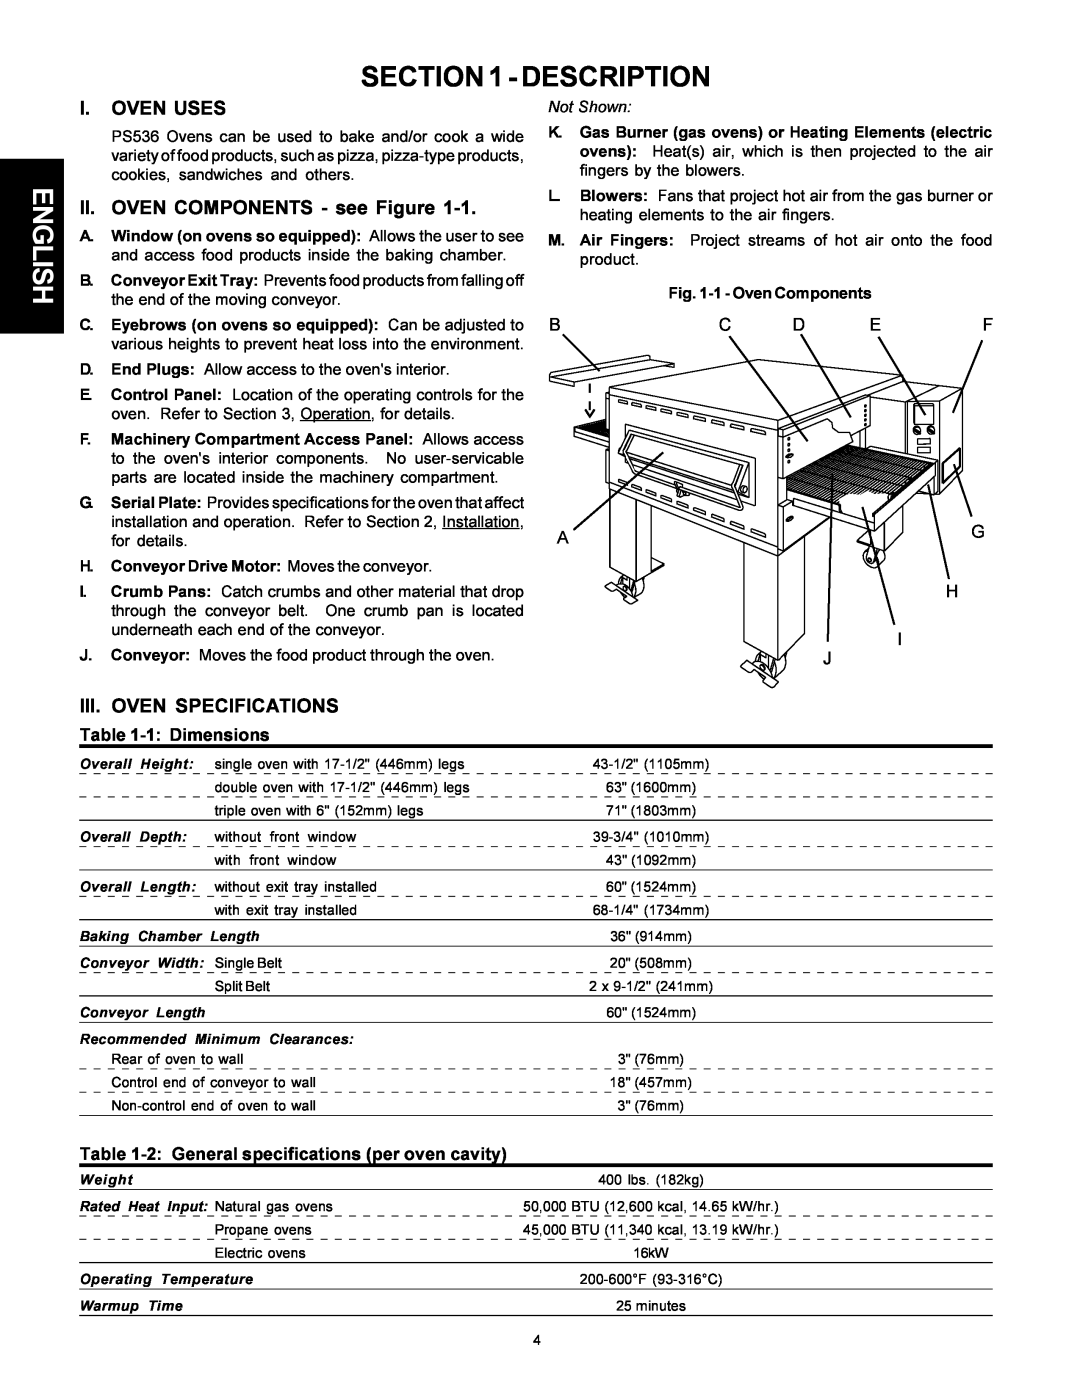 Middleby Marshall Model PS536 Description, English, I. Oven Uses, II. OVEN COMPONENTS - see Figure, 1 - Oven Components 